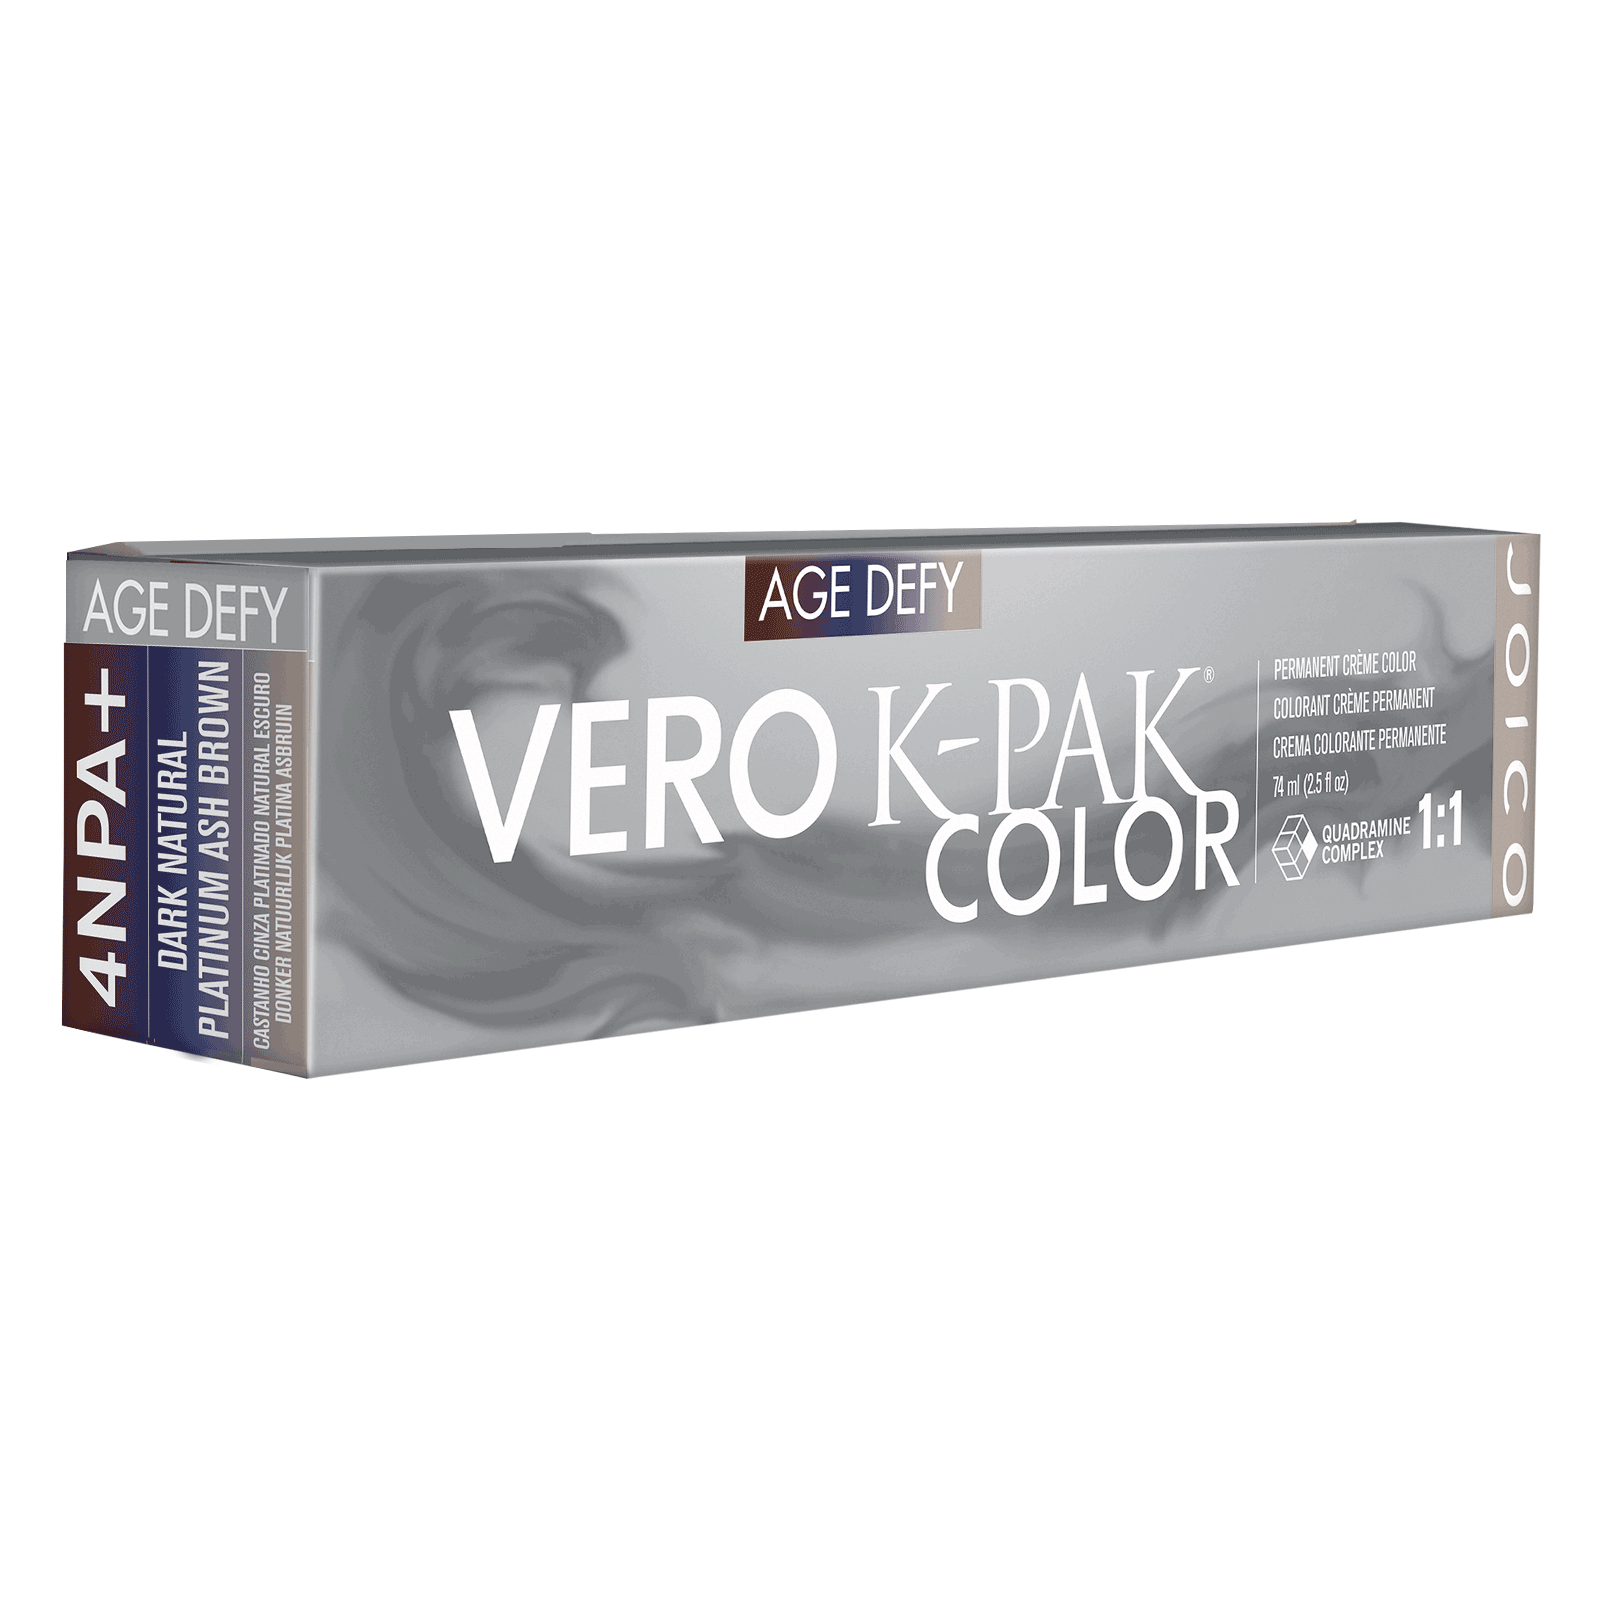 Joico Age Defy Color Chart